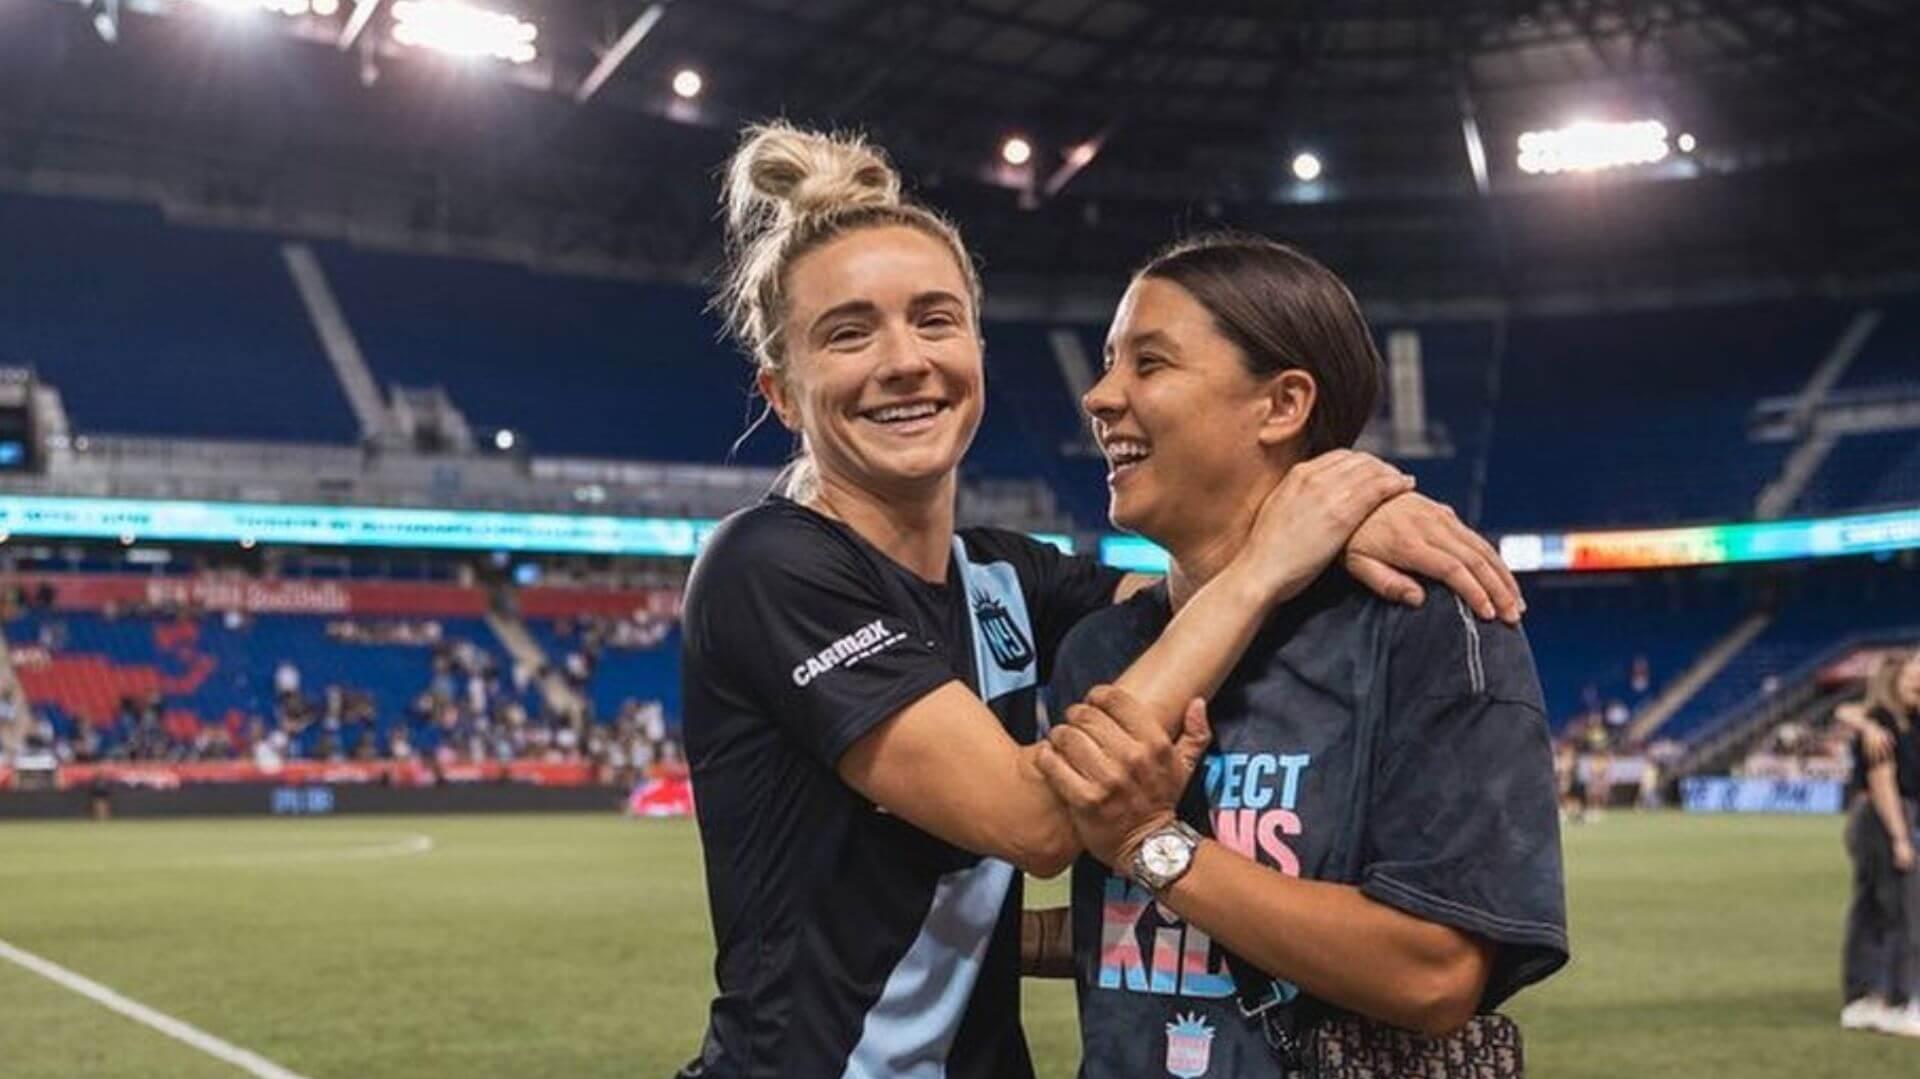 The Best Lesbian Soccer Couples And Stories This Pride Month